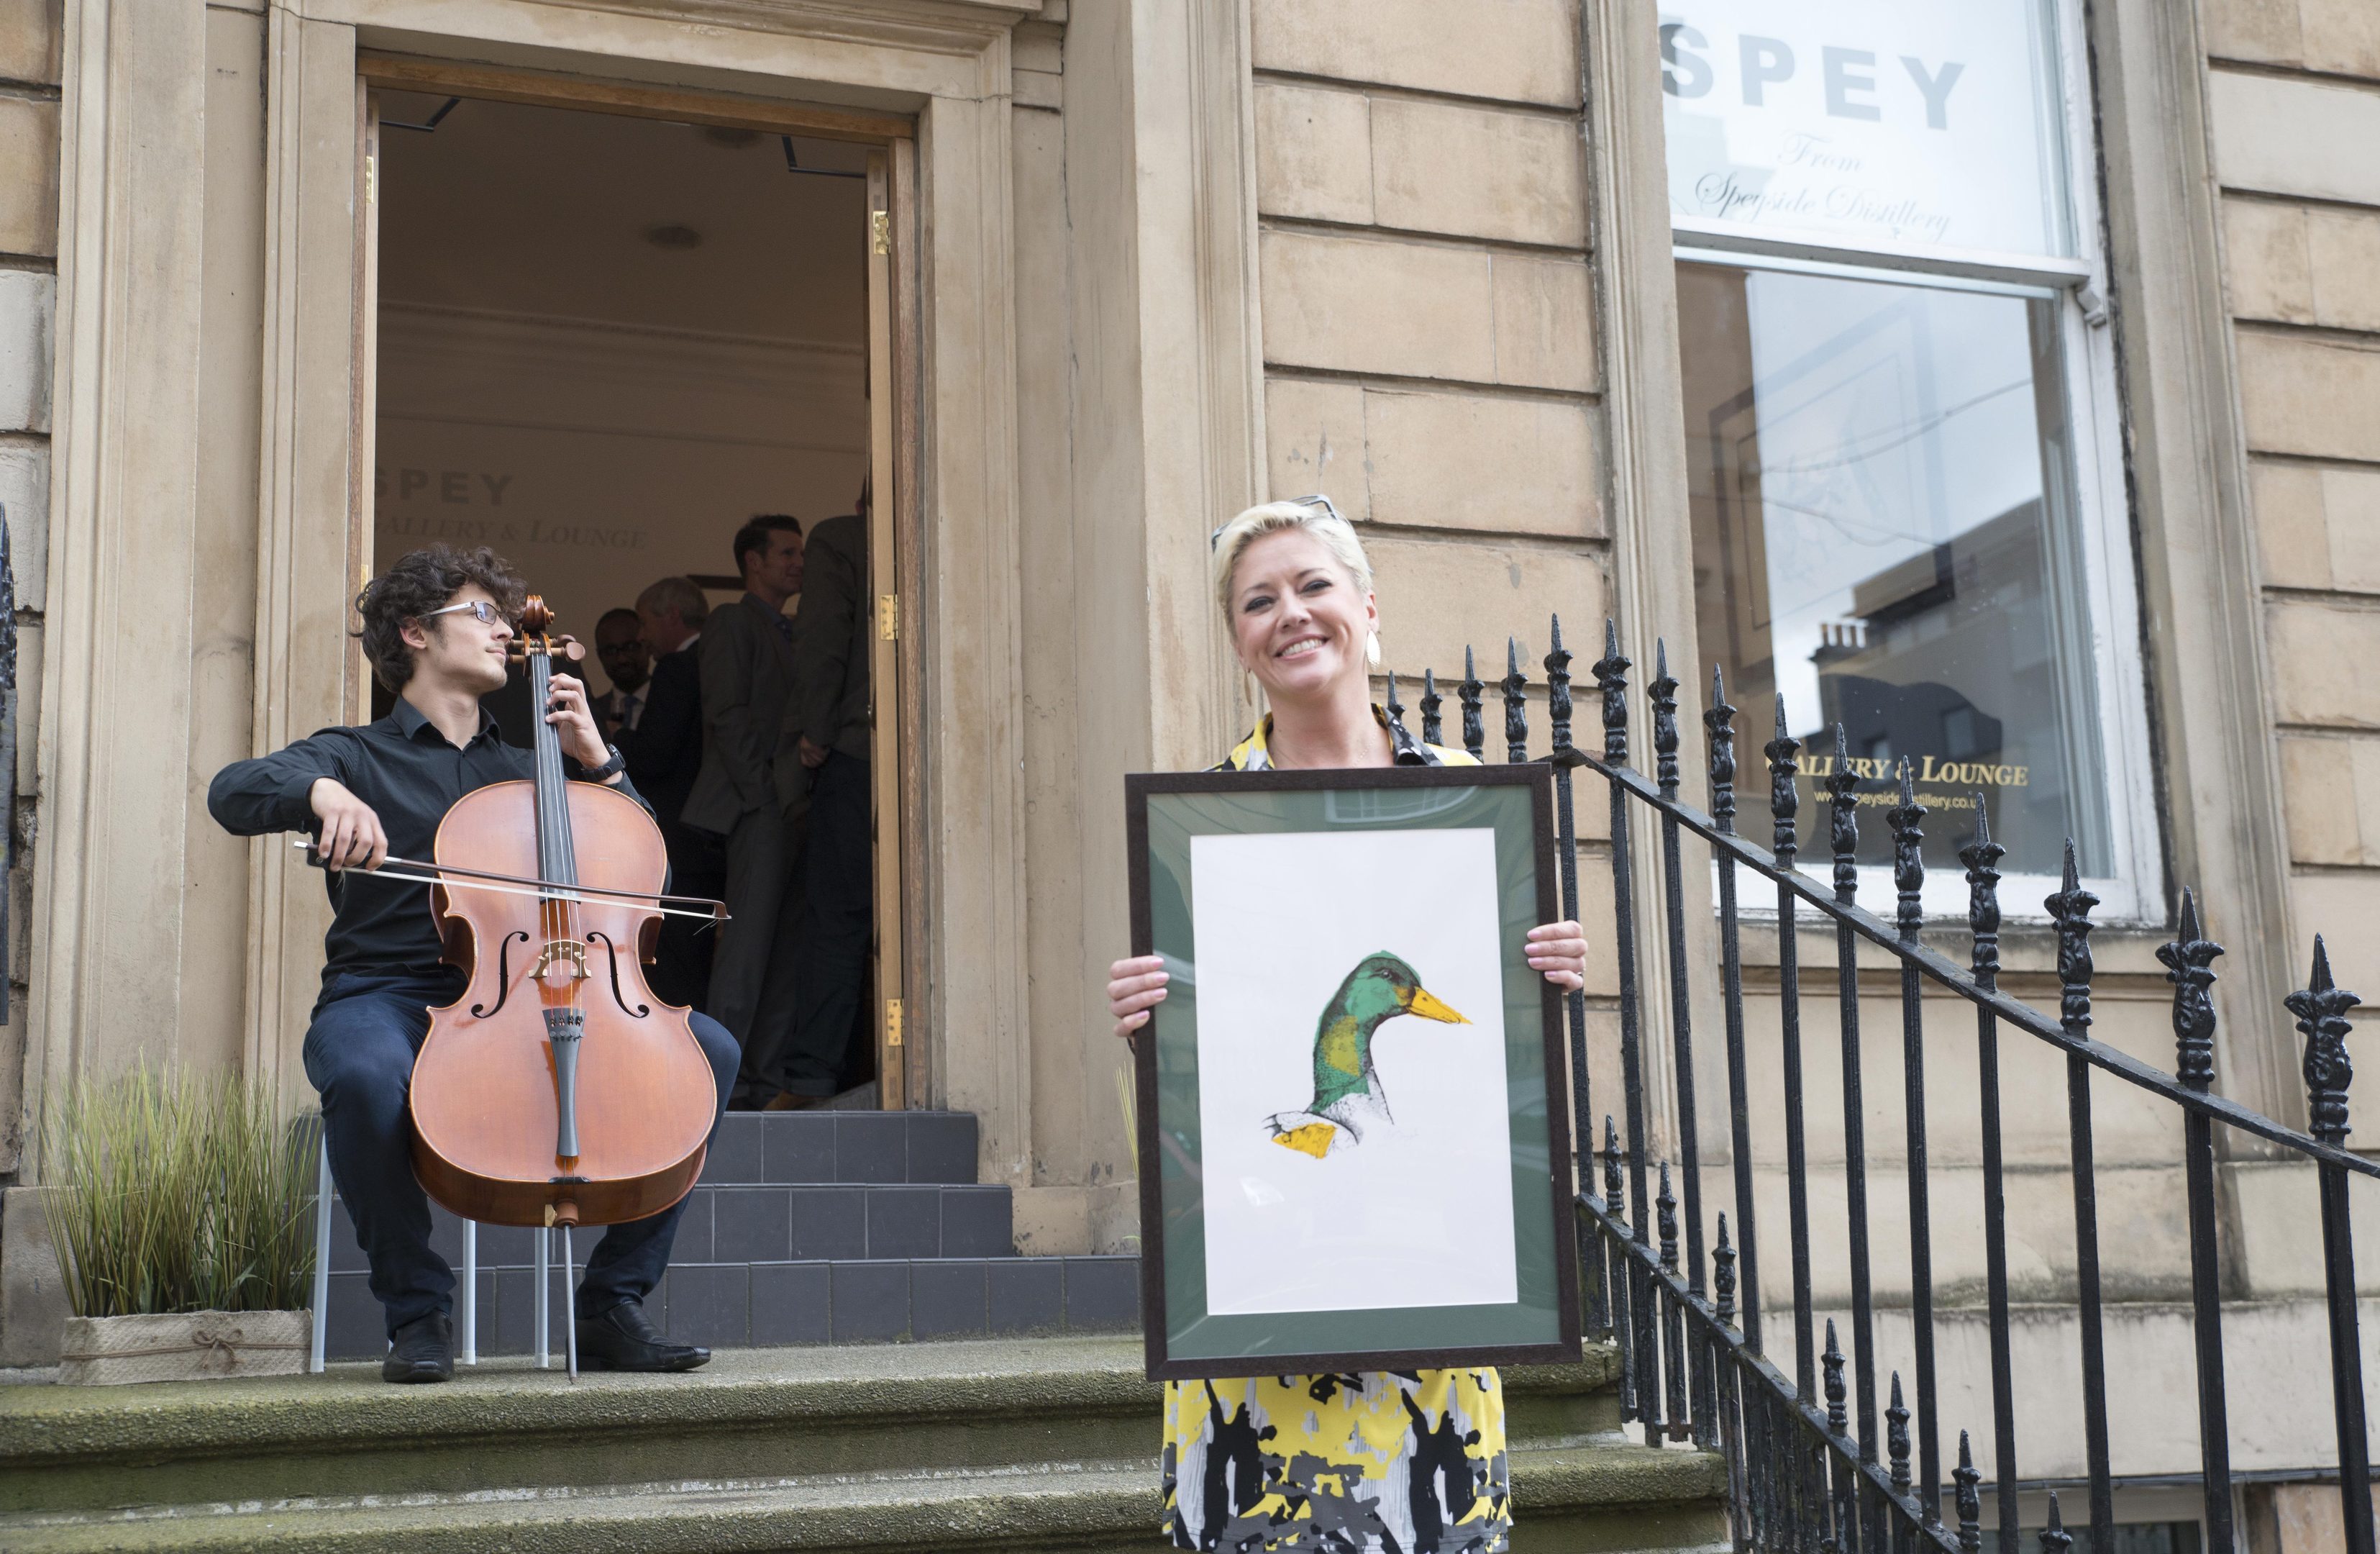 Joanna McDonough, Artist in Residence at Speyside Distillery, in front of the new SPEY Gallery and Lounge on Bath Street, Glasgow.